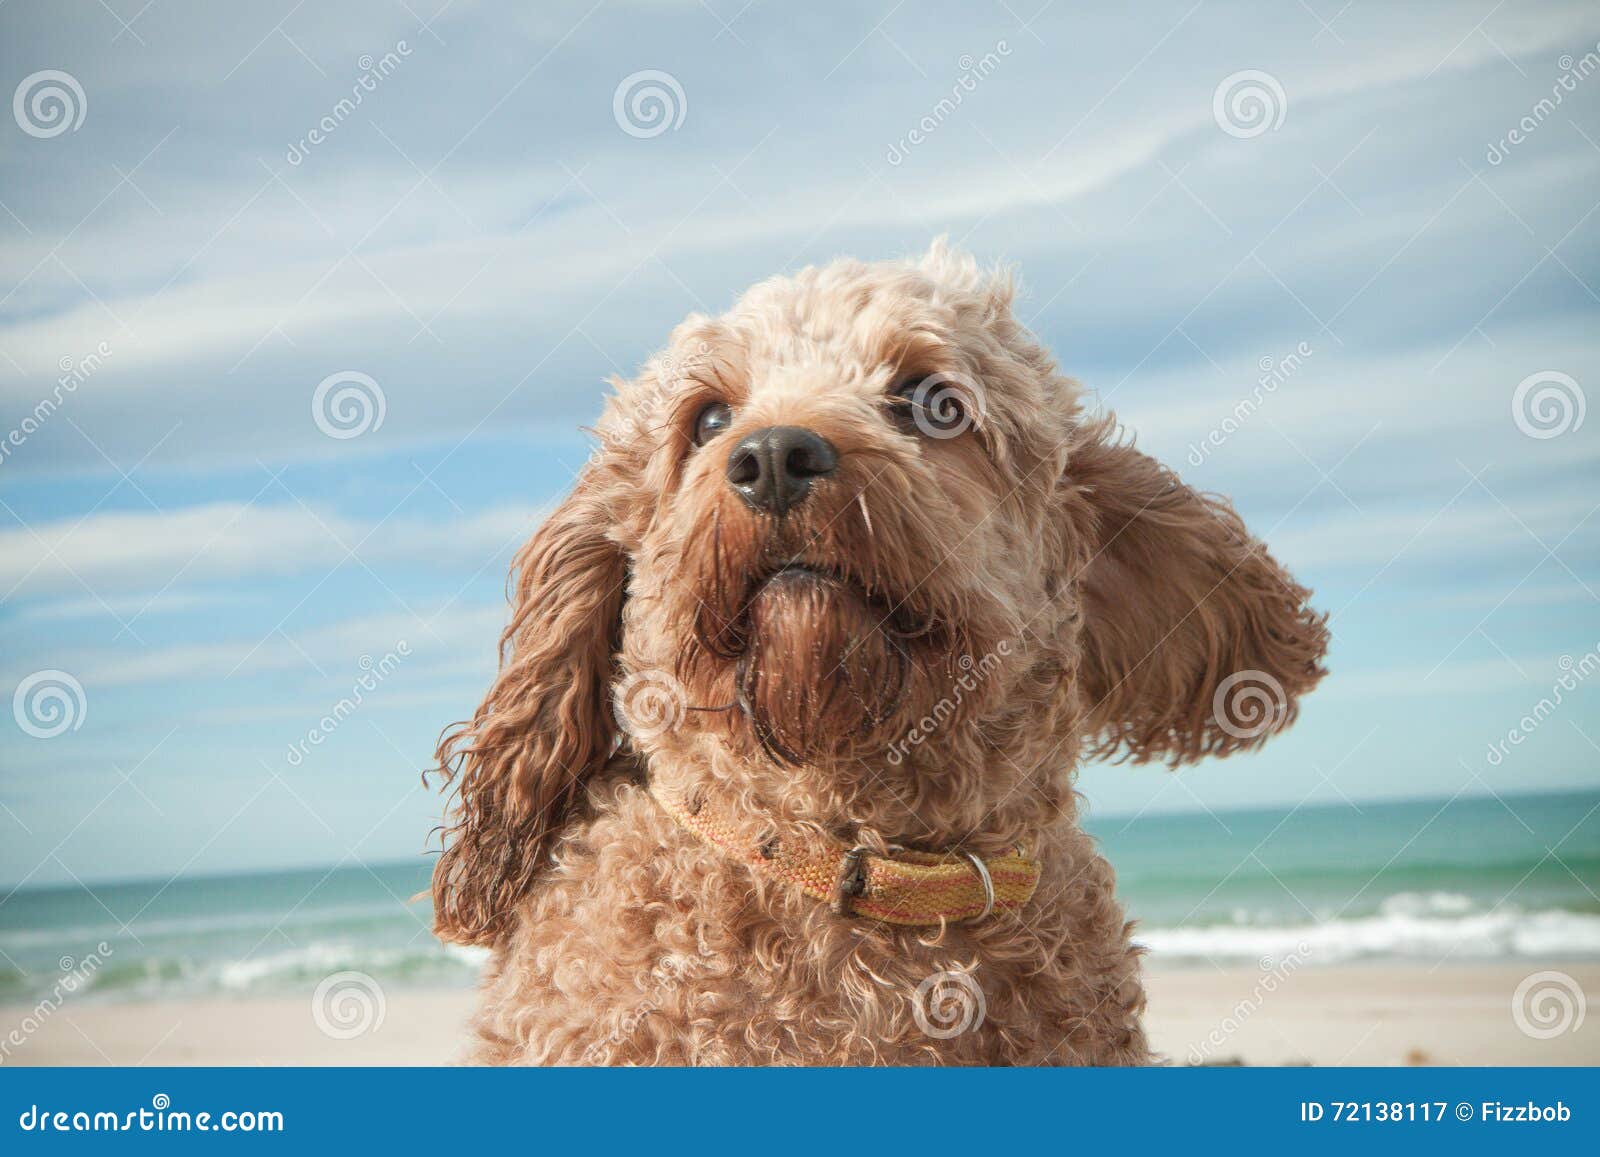 Head And Shoulders Portrait Shot Of Cute Cavalier King Charles Spaniel Crossed With Poodle Dog Stock Image Image Of Companion Eyes 72138117